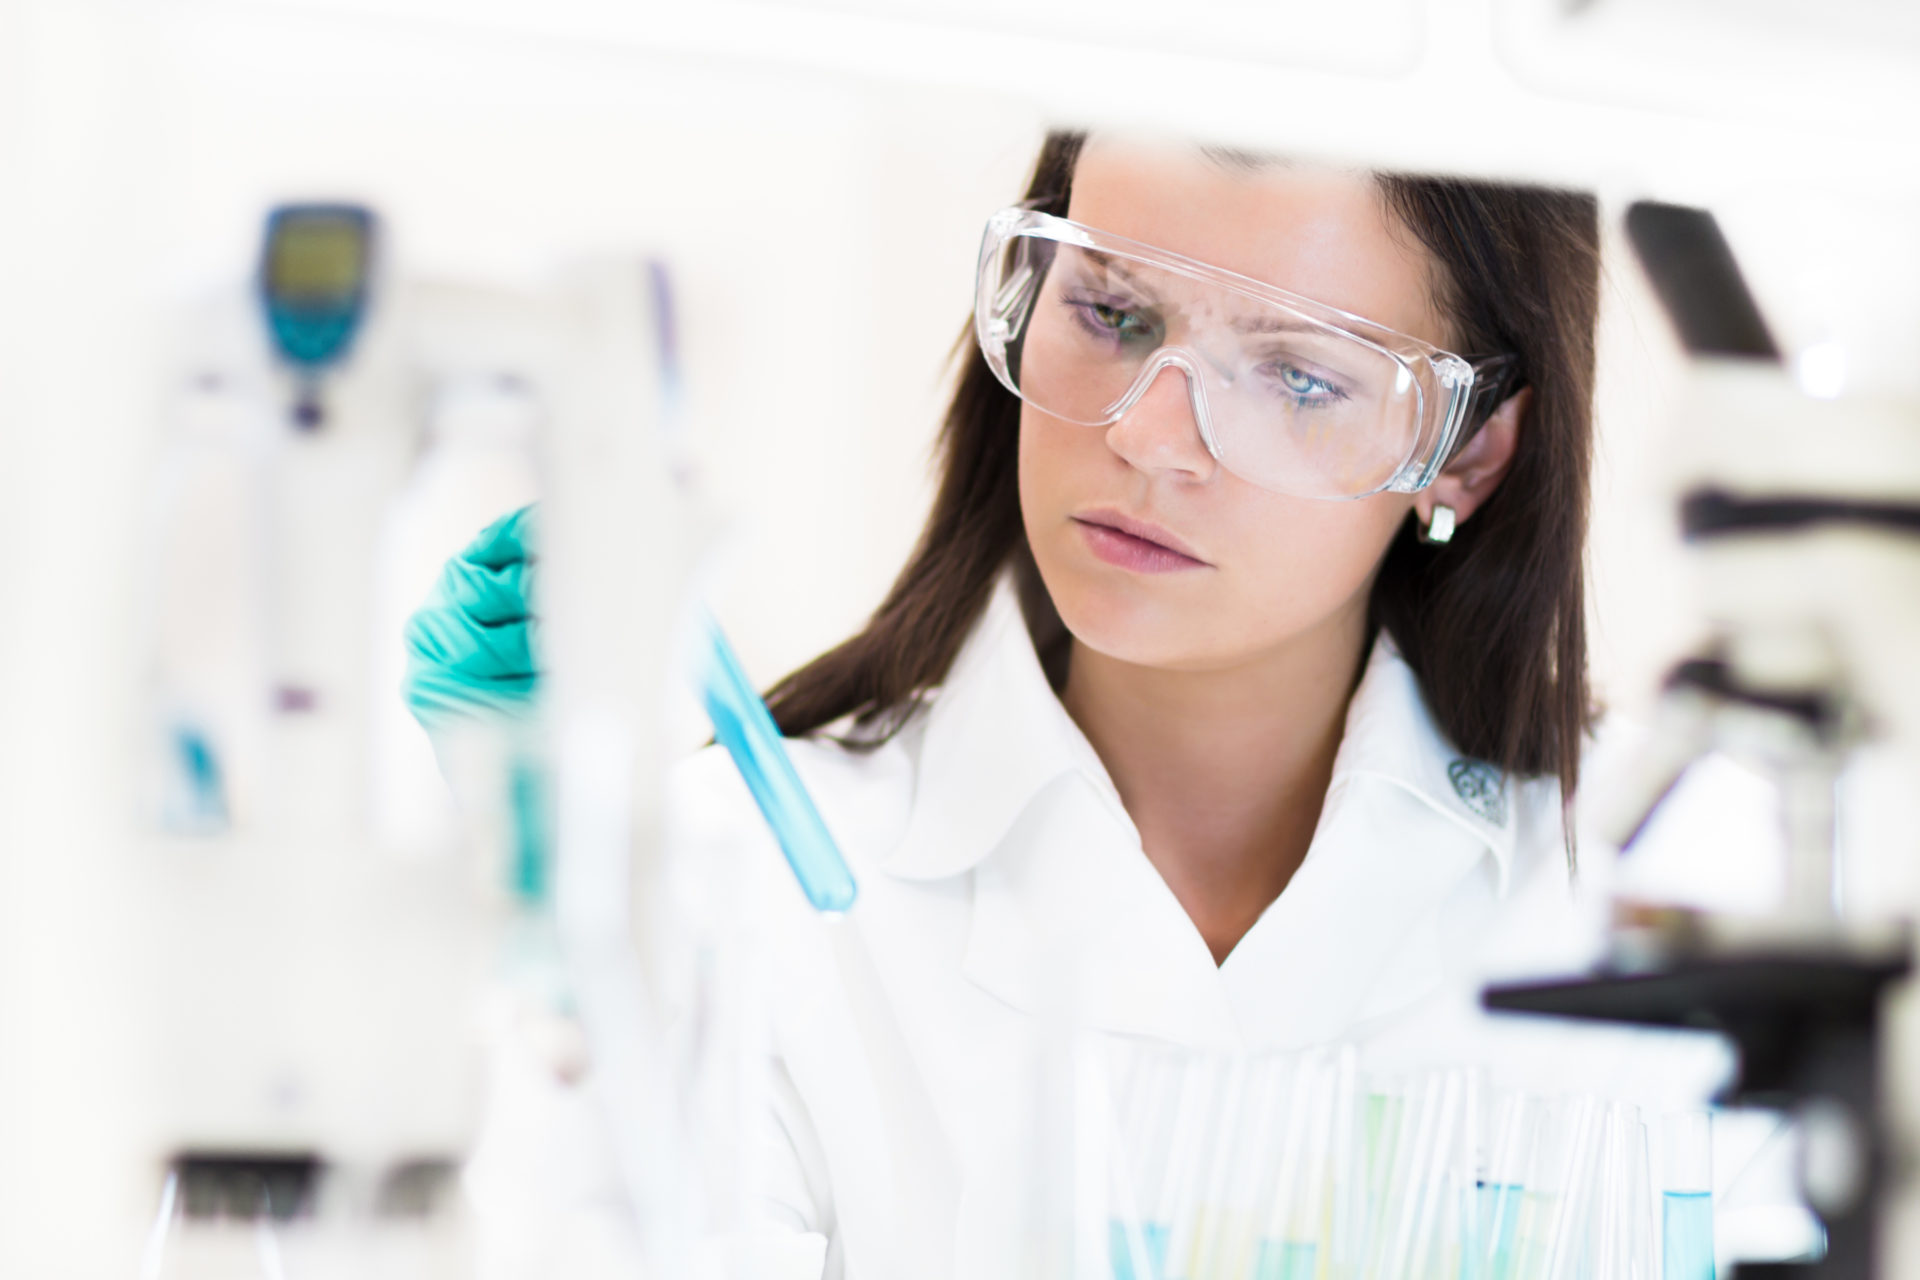 Our team provides a helpful guide to understand IVF lab roles